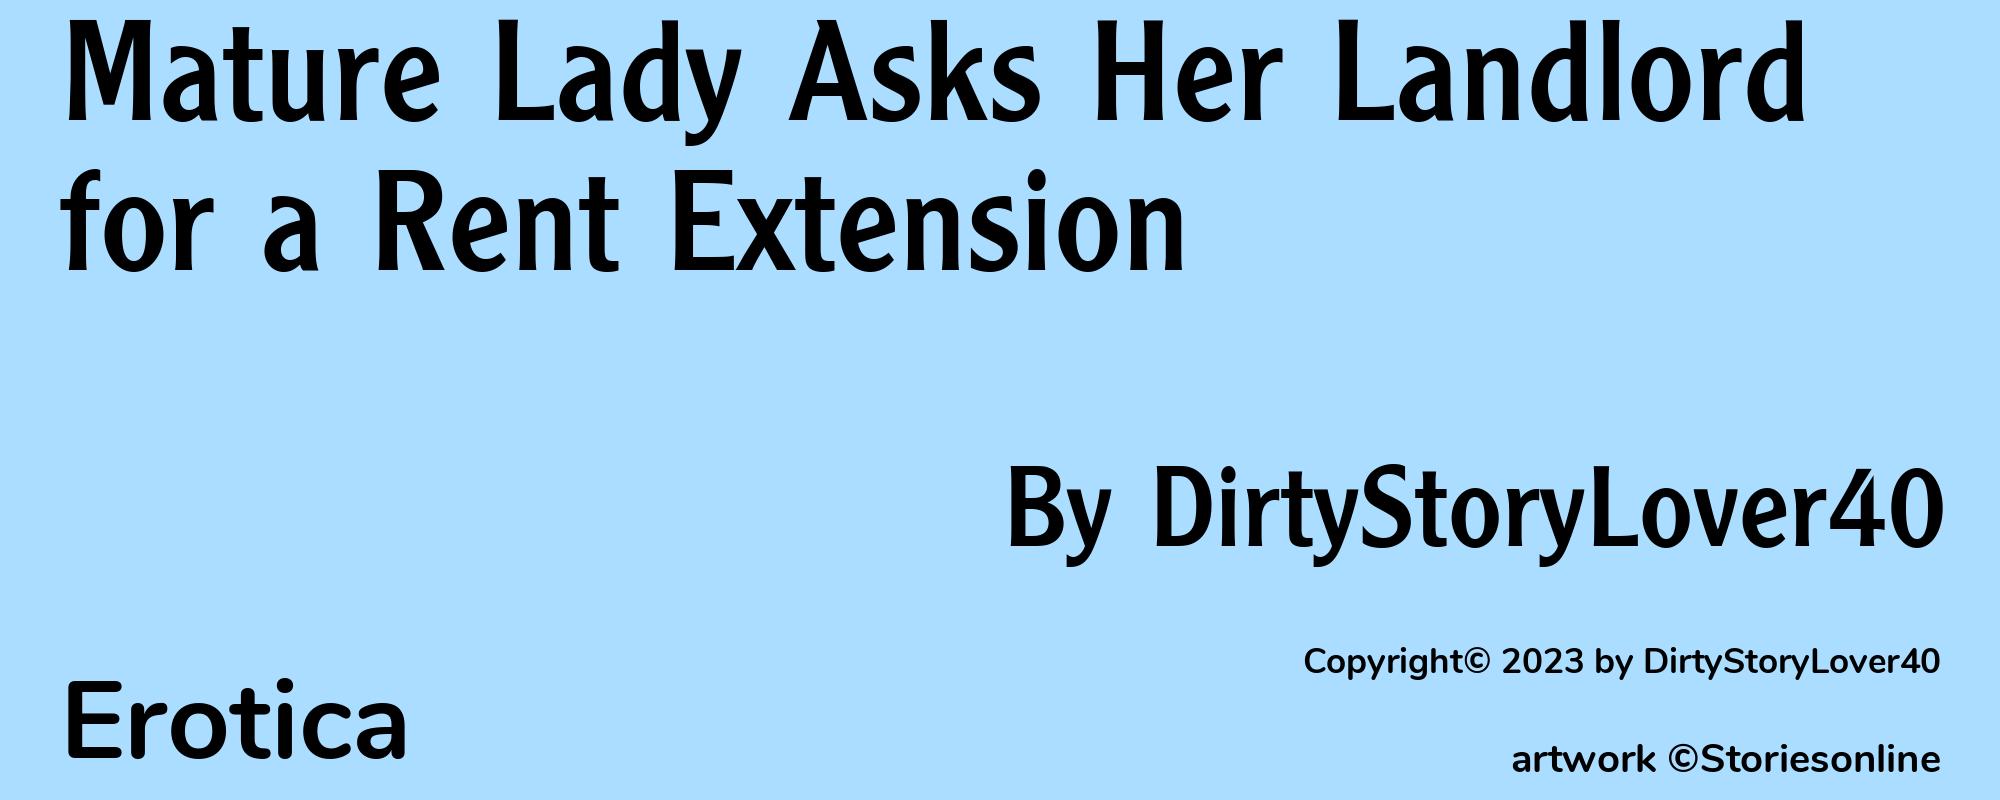 Mature Lady Asks Her Landlord for a Rent Extension - Cover